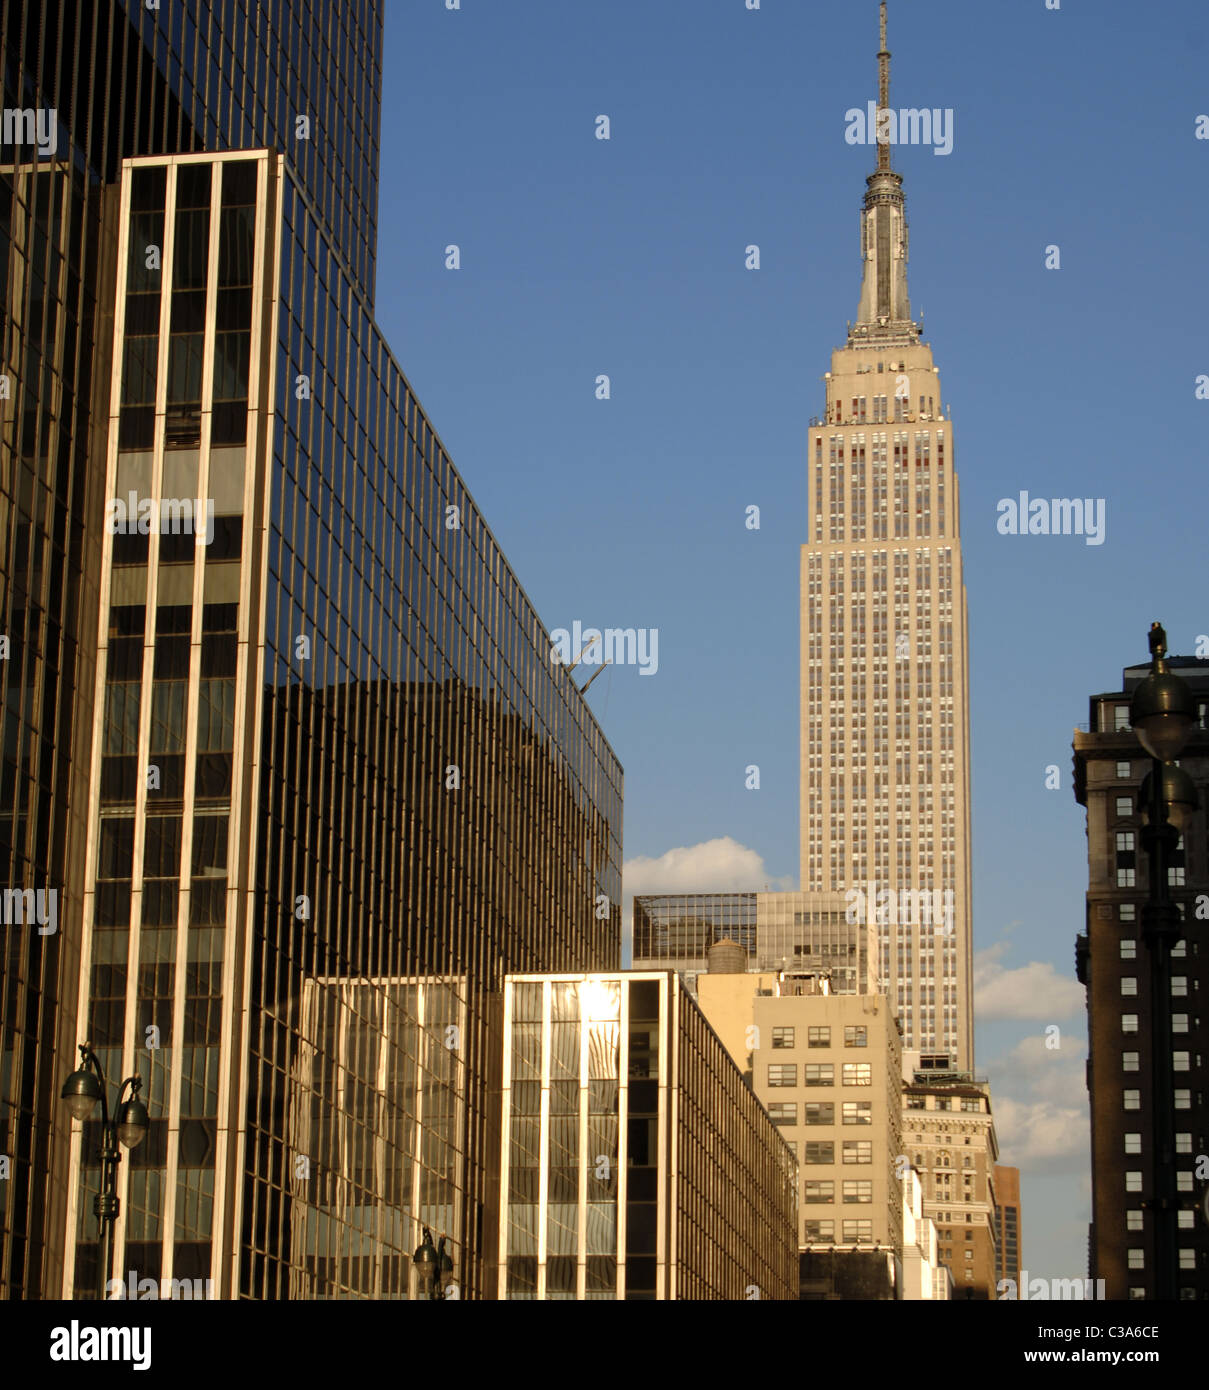 United States. New York. Empire State Building, built between 1929 and 1931 by William Lamb. Stock Photo